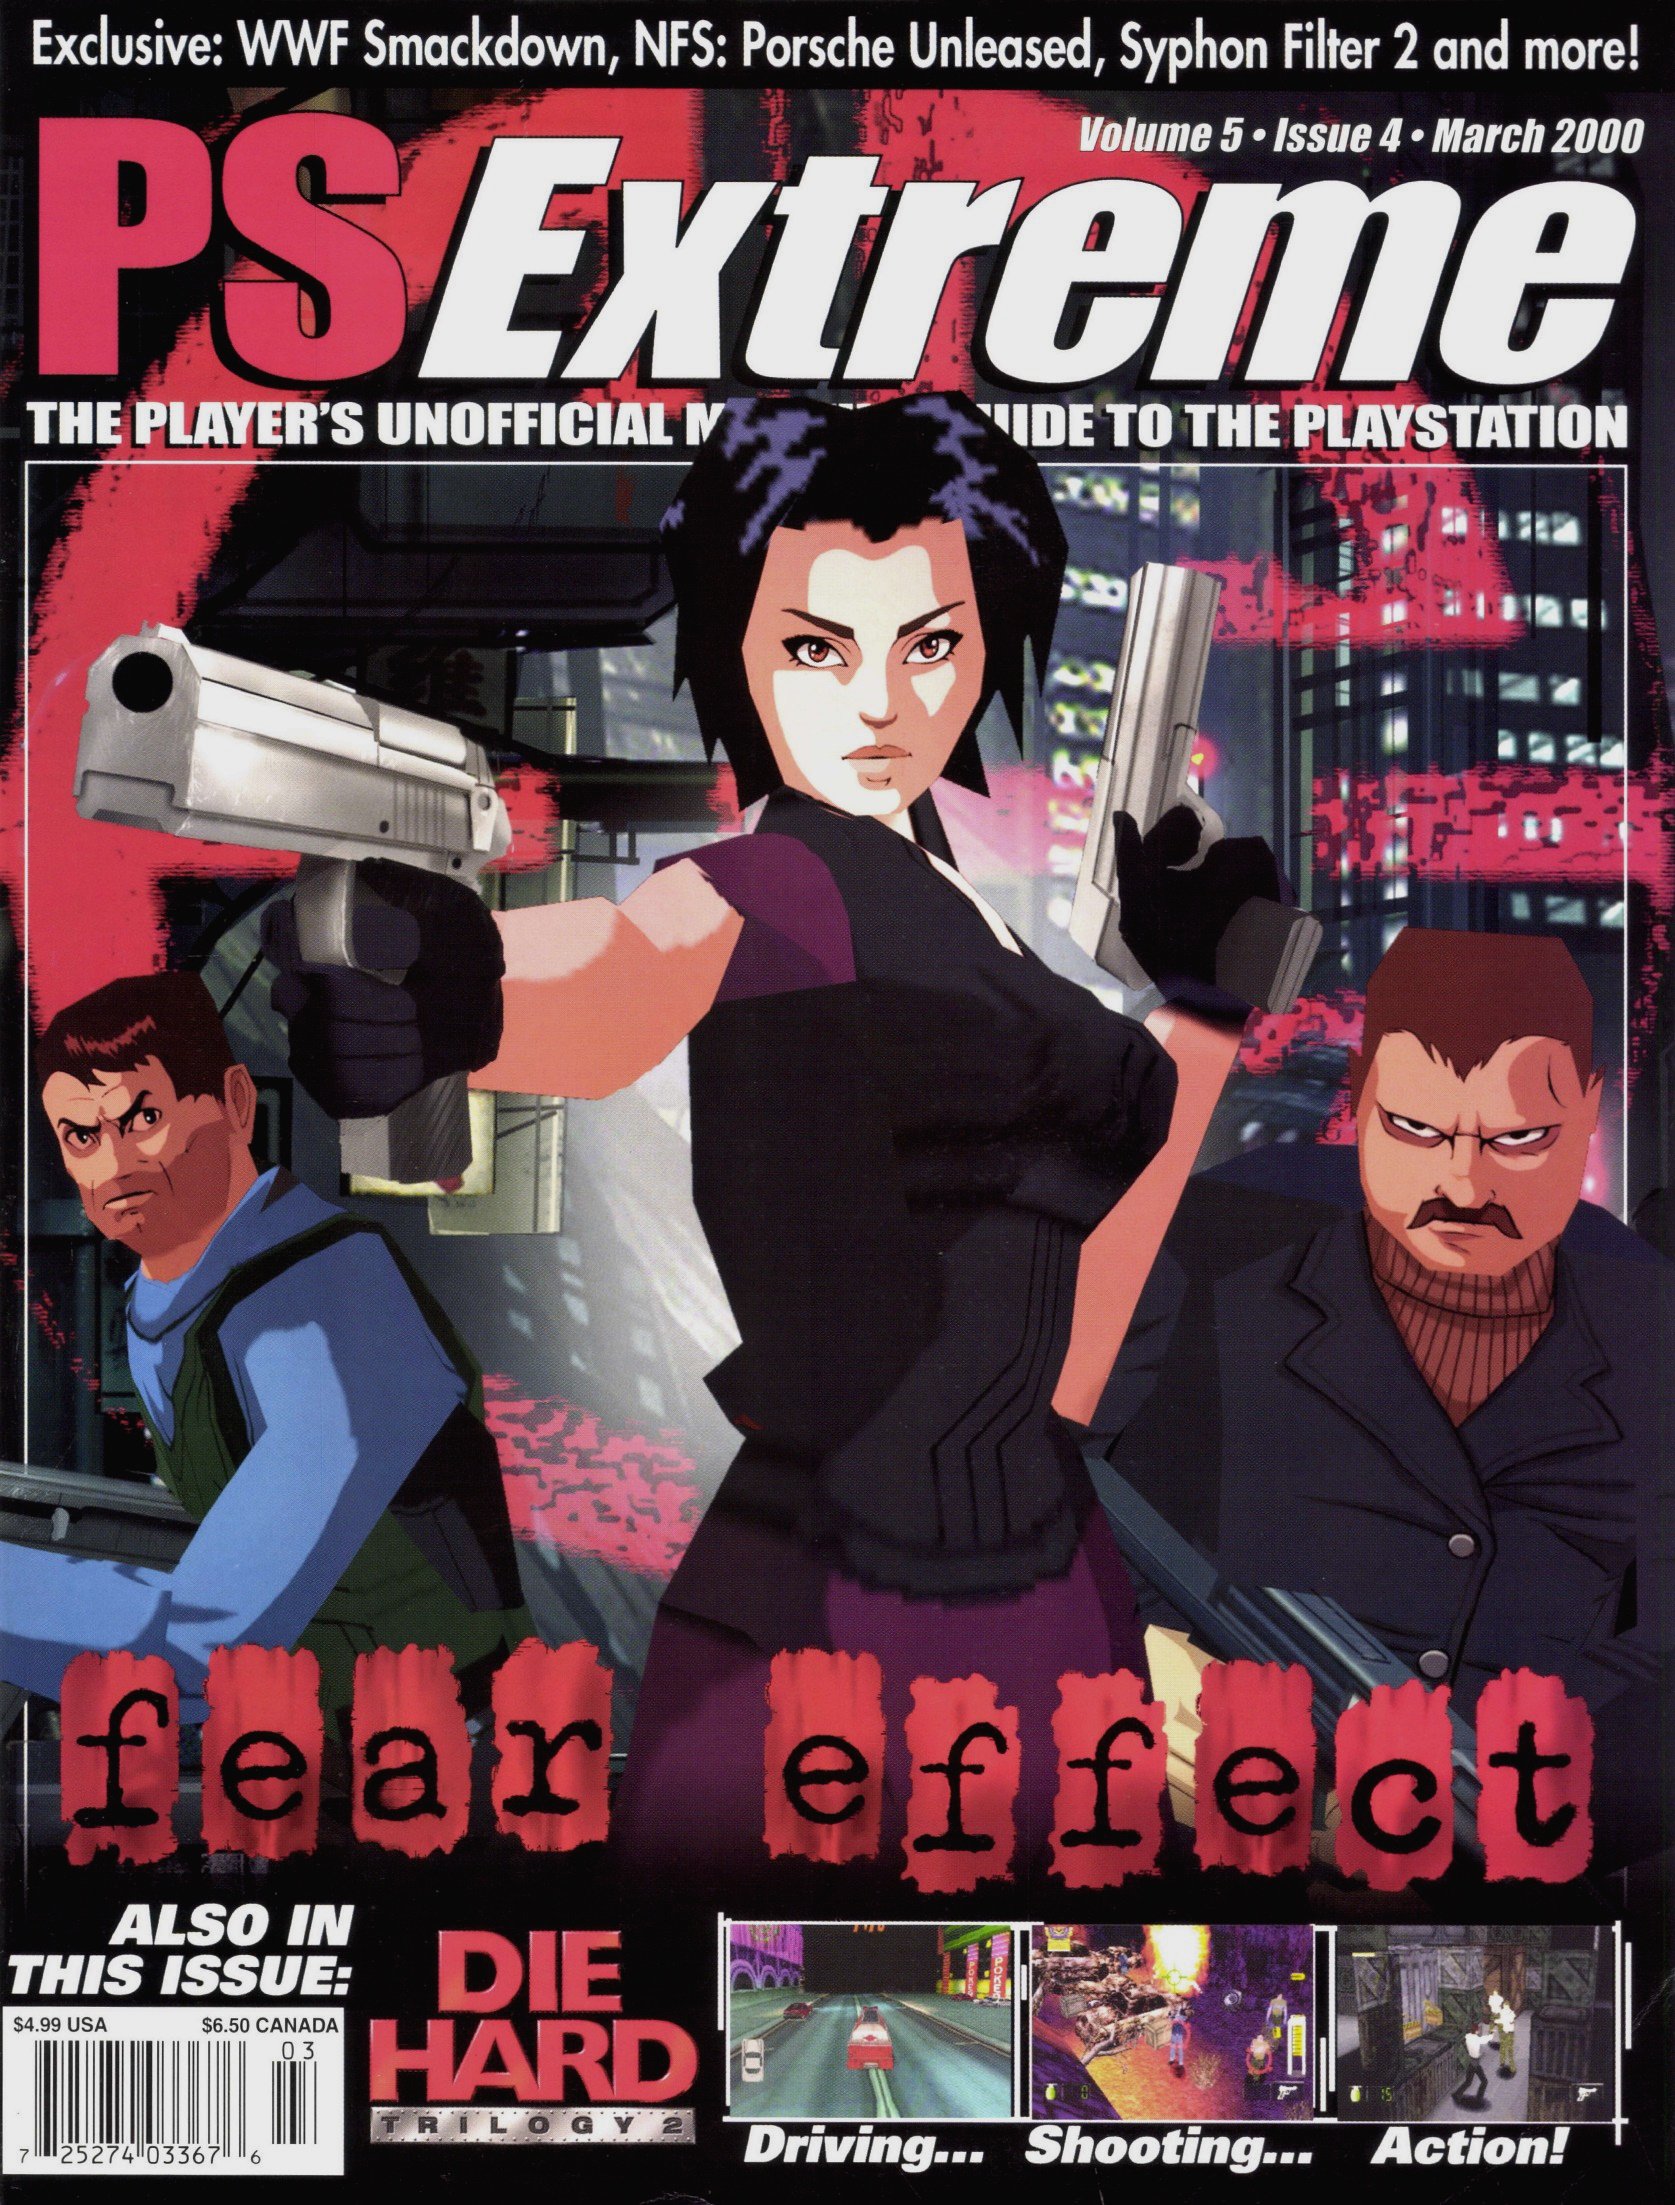 PSExtreme Issue 52 (March 2000)